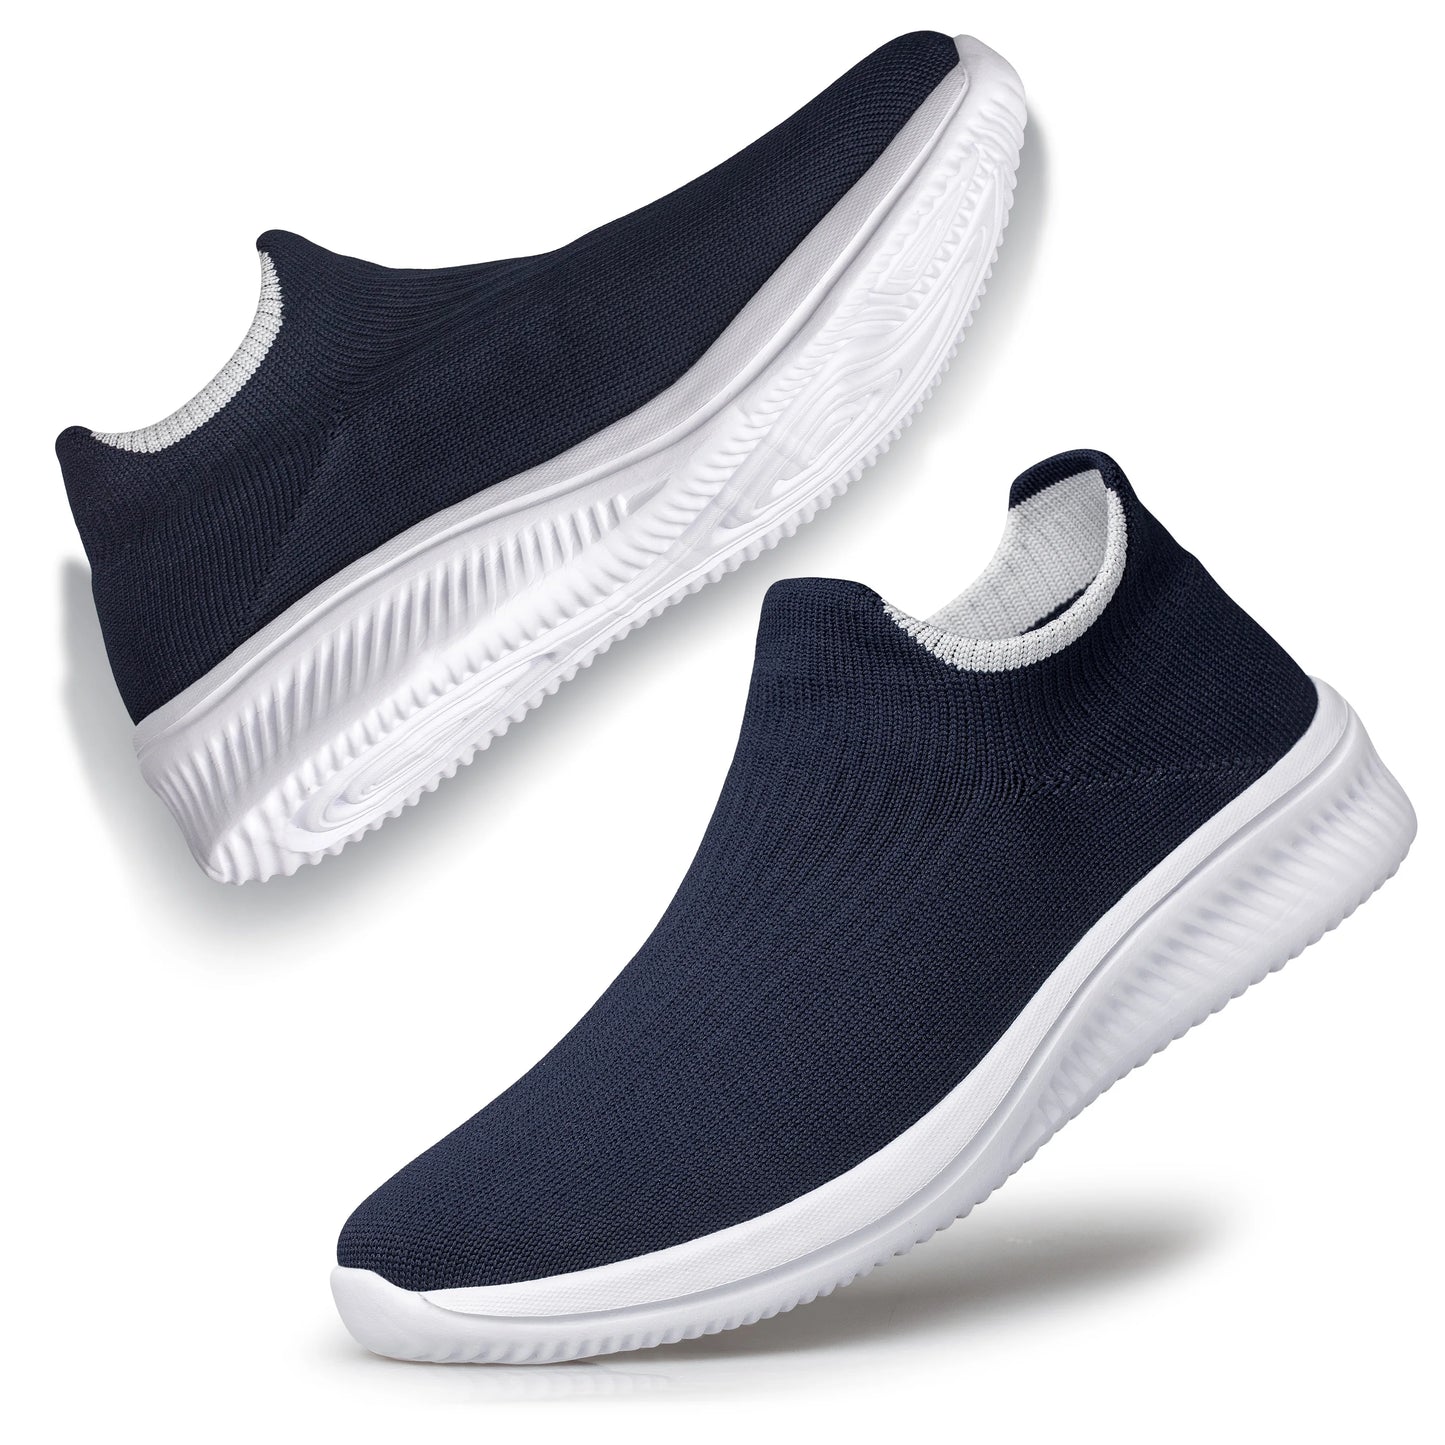 Men's Sock Sneakers - Lightweight Breathable Shoes